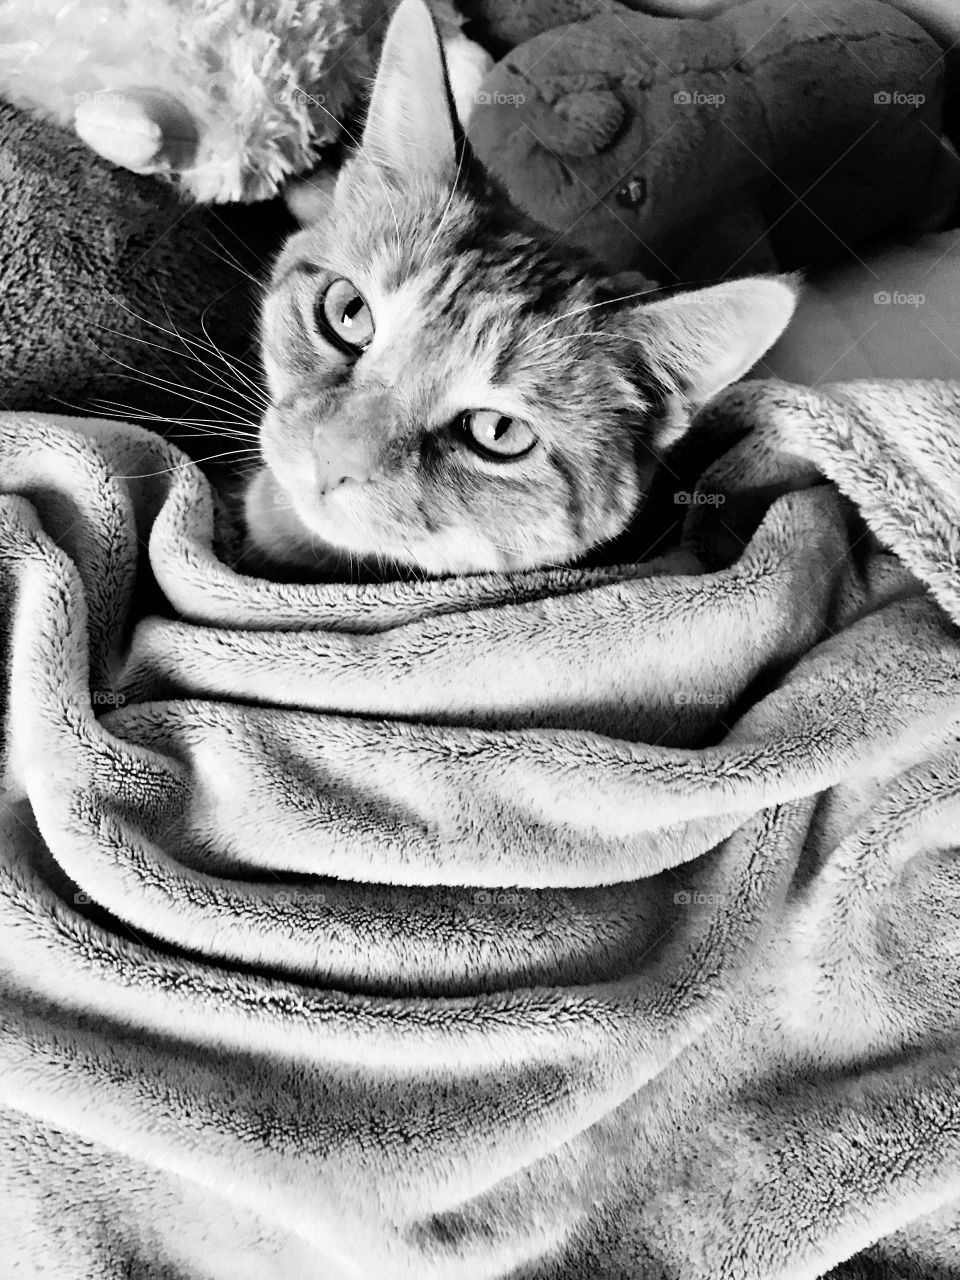 Darling black and white photo of orange tabby cat all cuddled up in comfy blanket! 